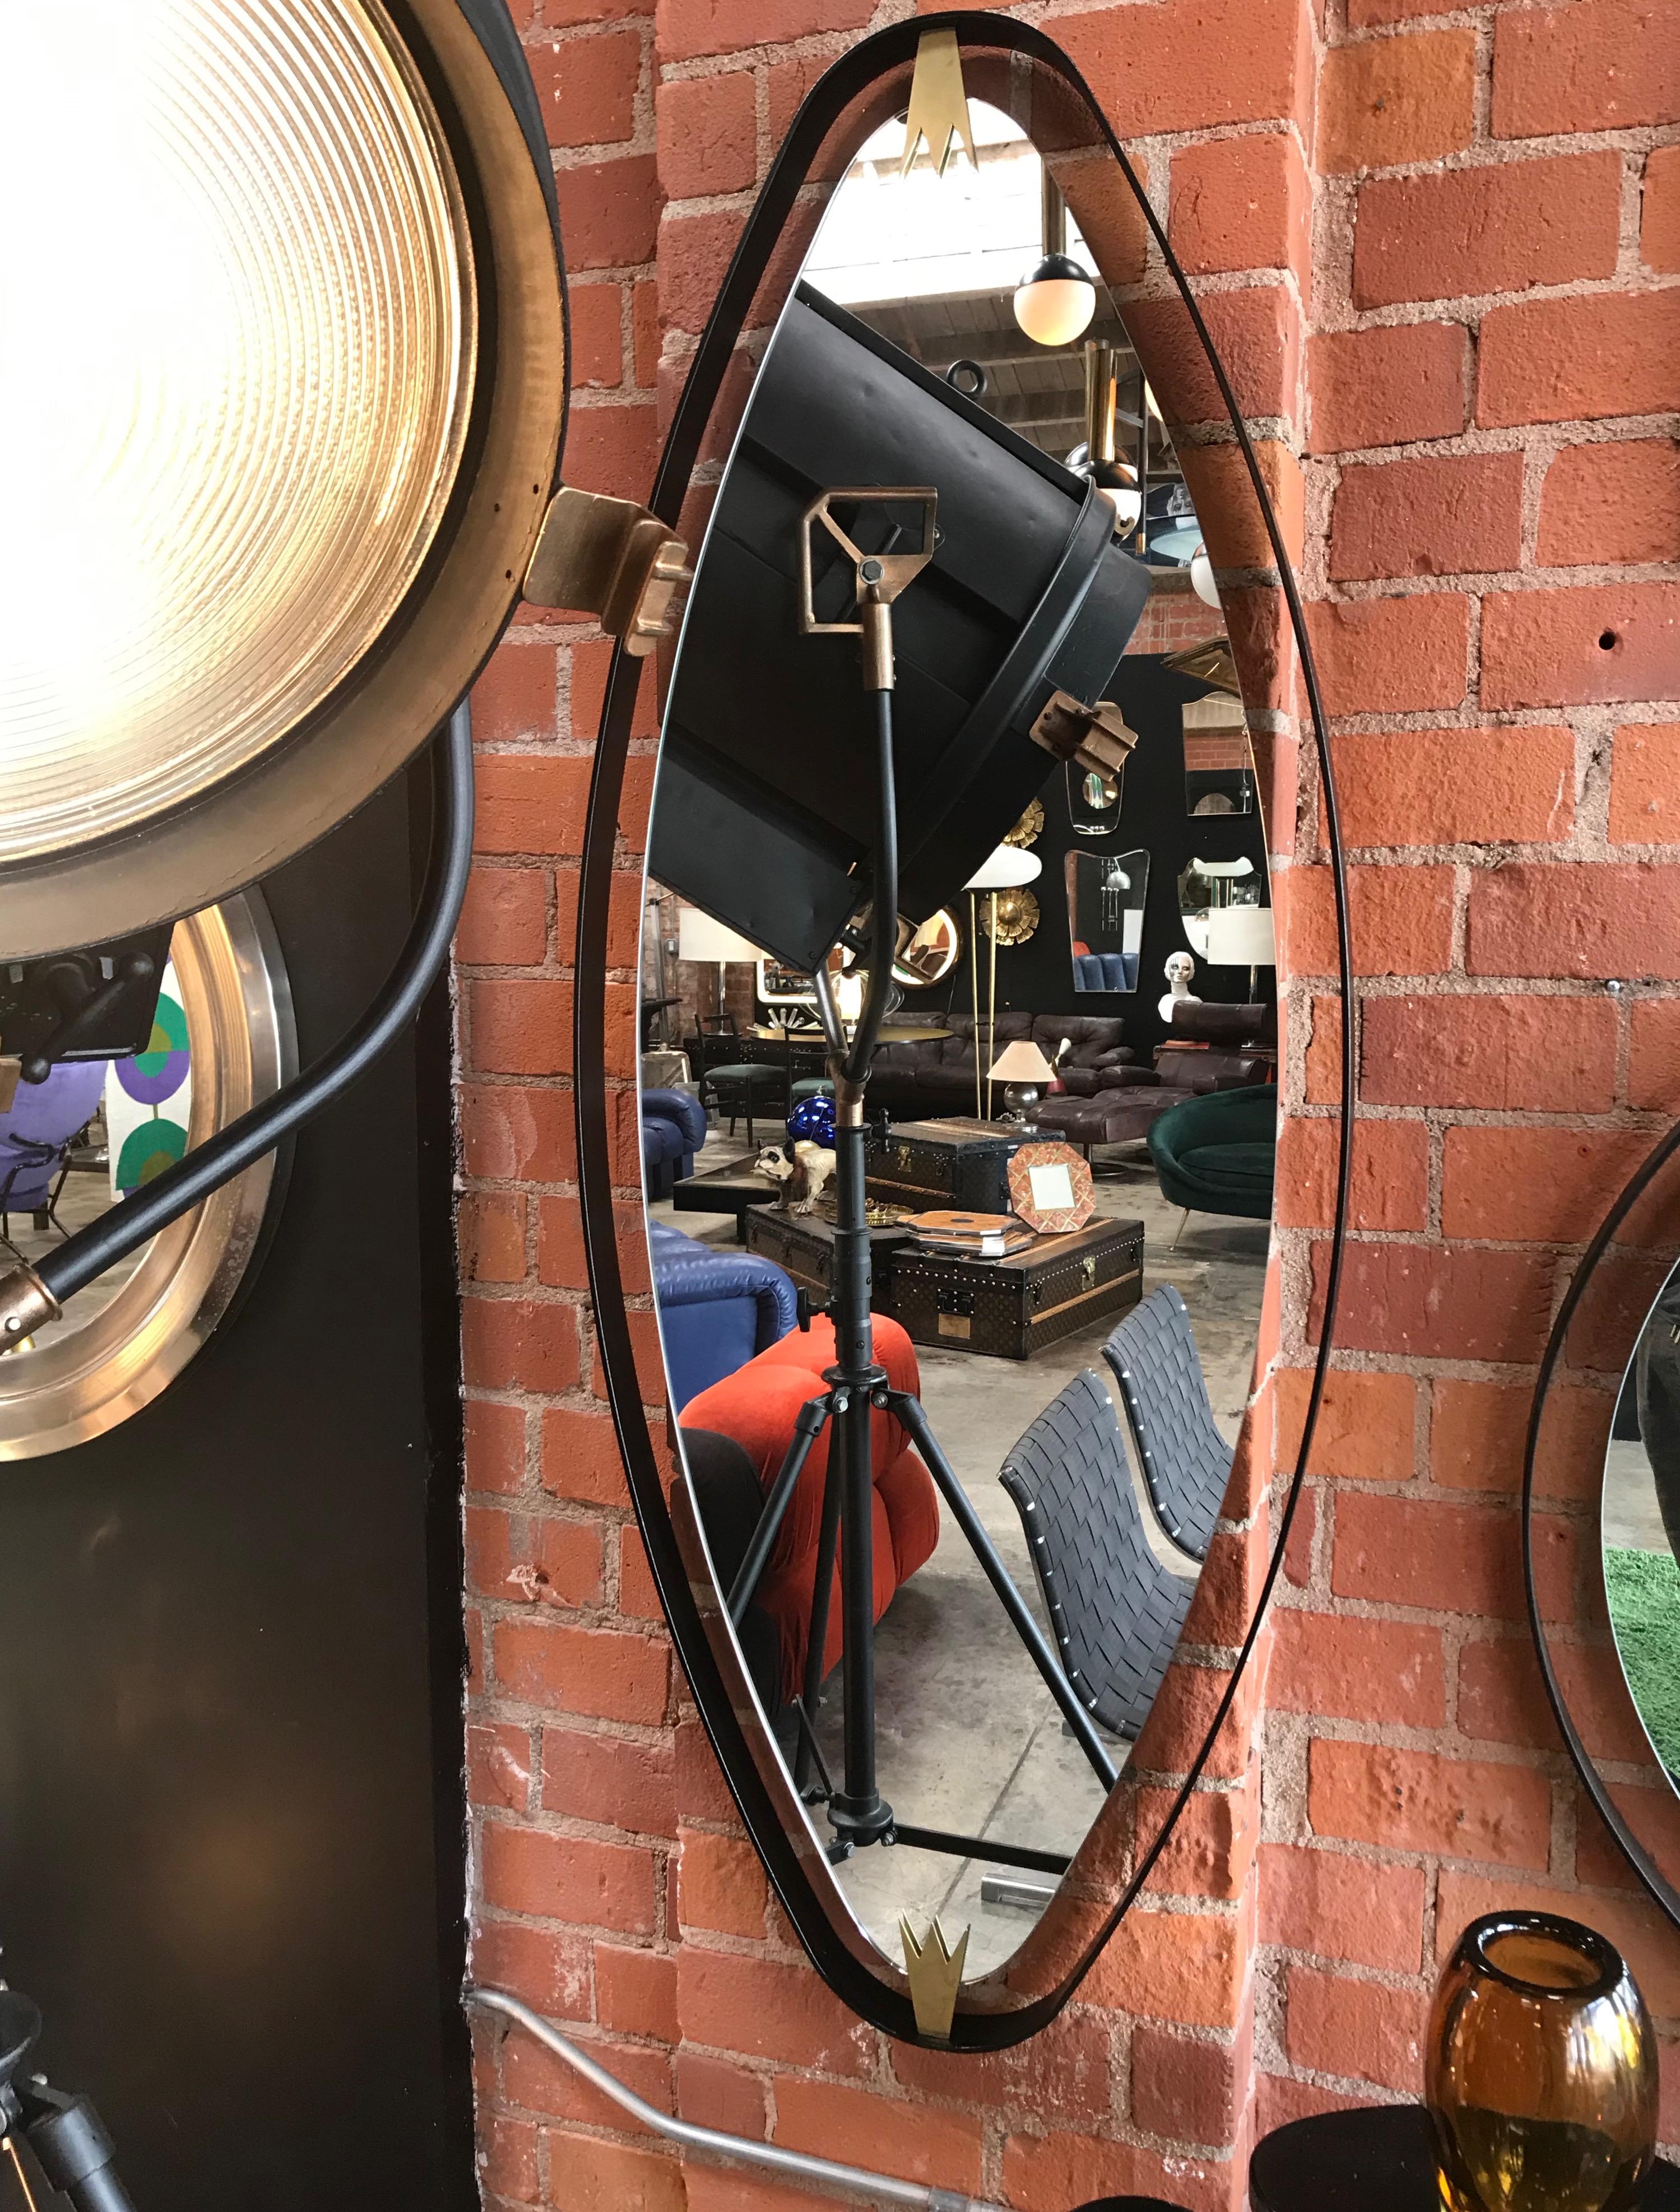 oversized oval wall mirrors